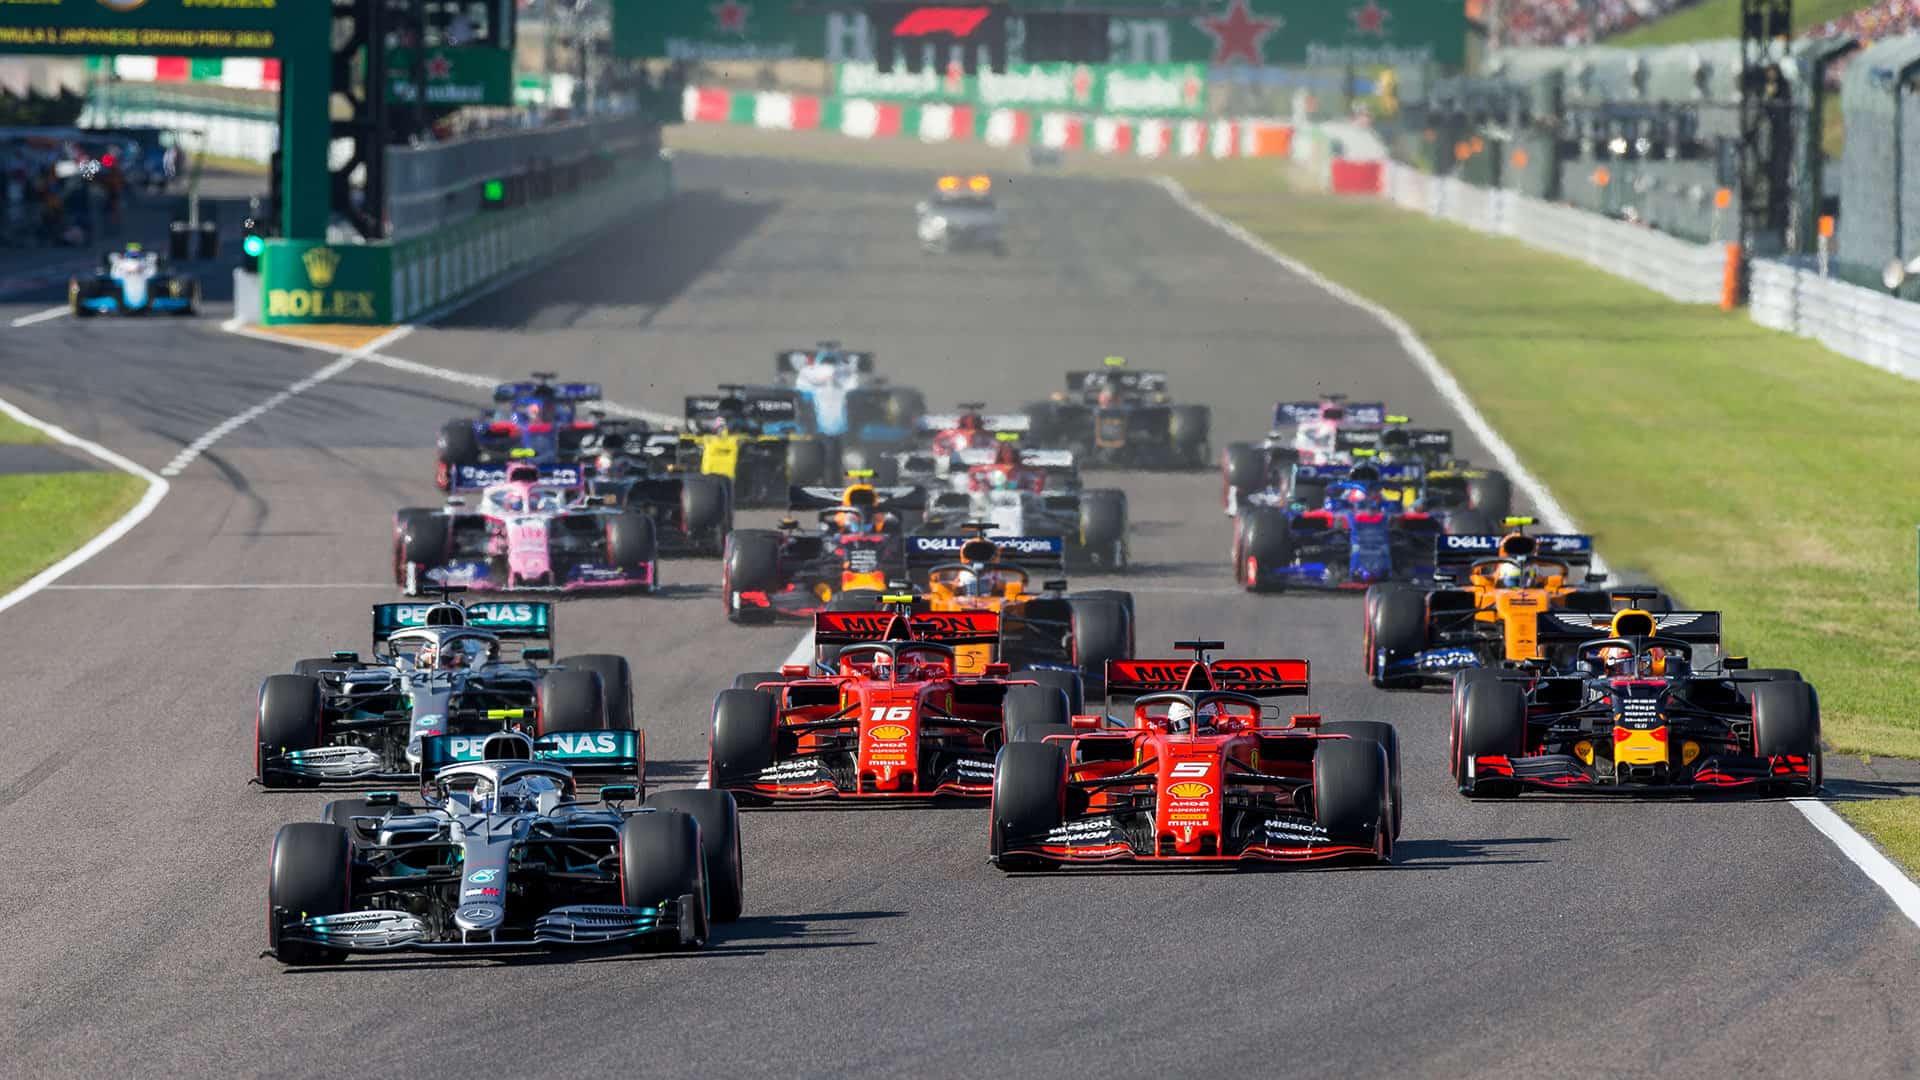 F1 Sprint Race – What You Need To Know About It